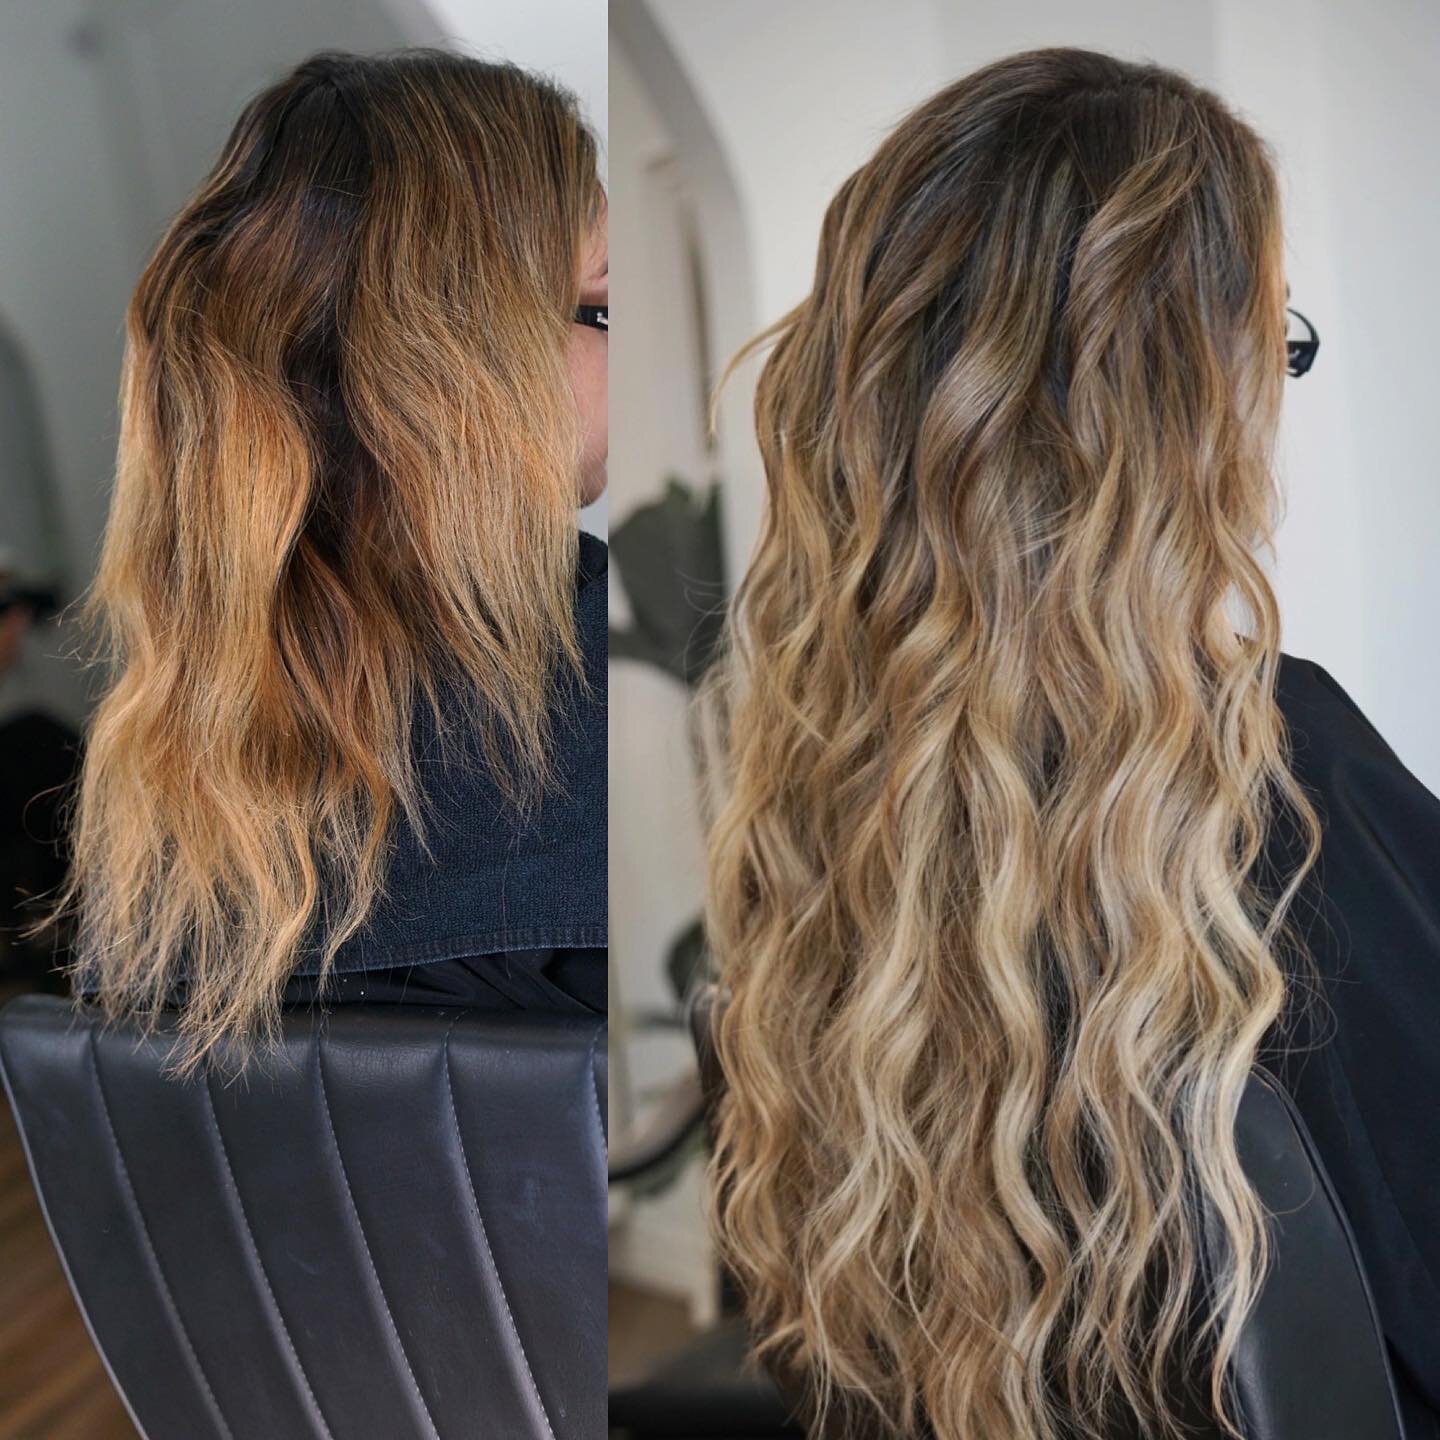 Every head of hair is DIFFERENT and that means every head of hair has different needs when it comes to extensions 📣

👏🏻They require CUSTOMIZATION👏🏻

☑️From custom color to placement, we customize our approach to extensions to achieve a natural a